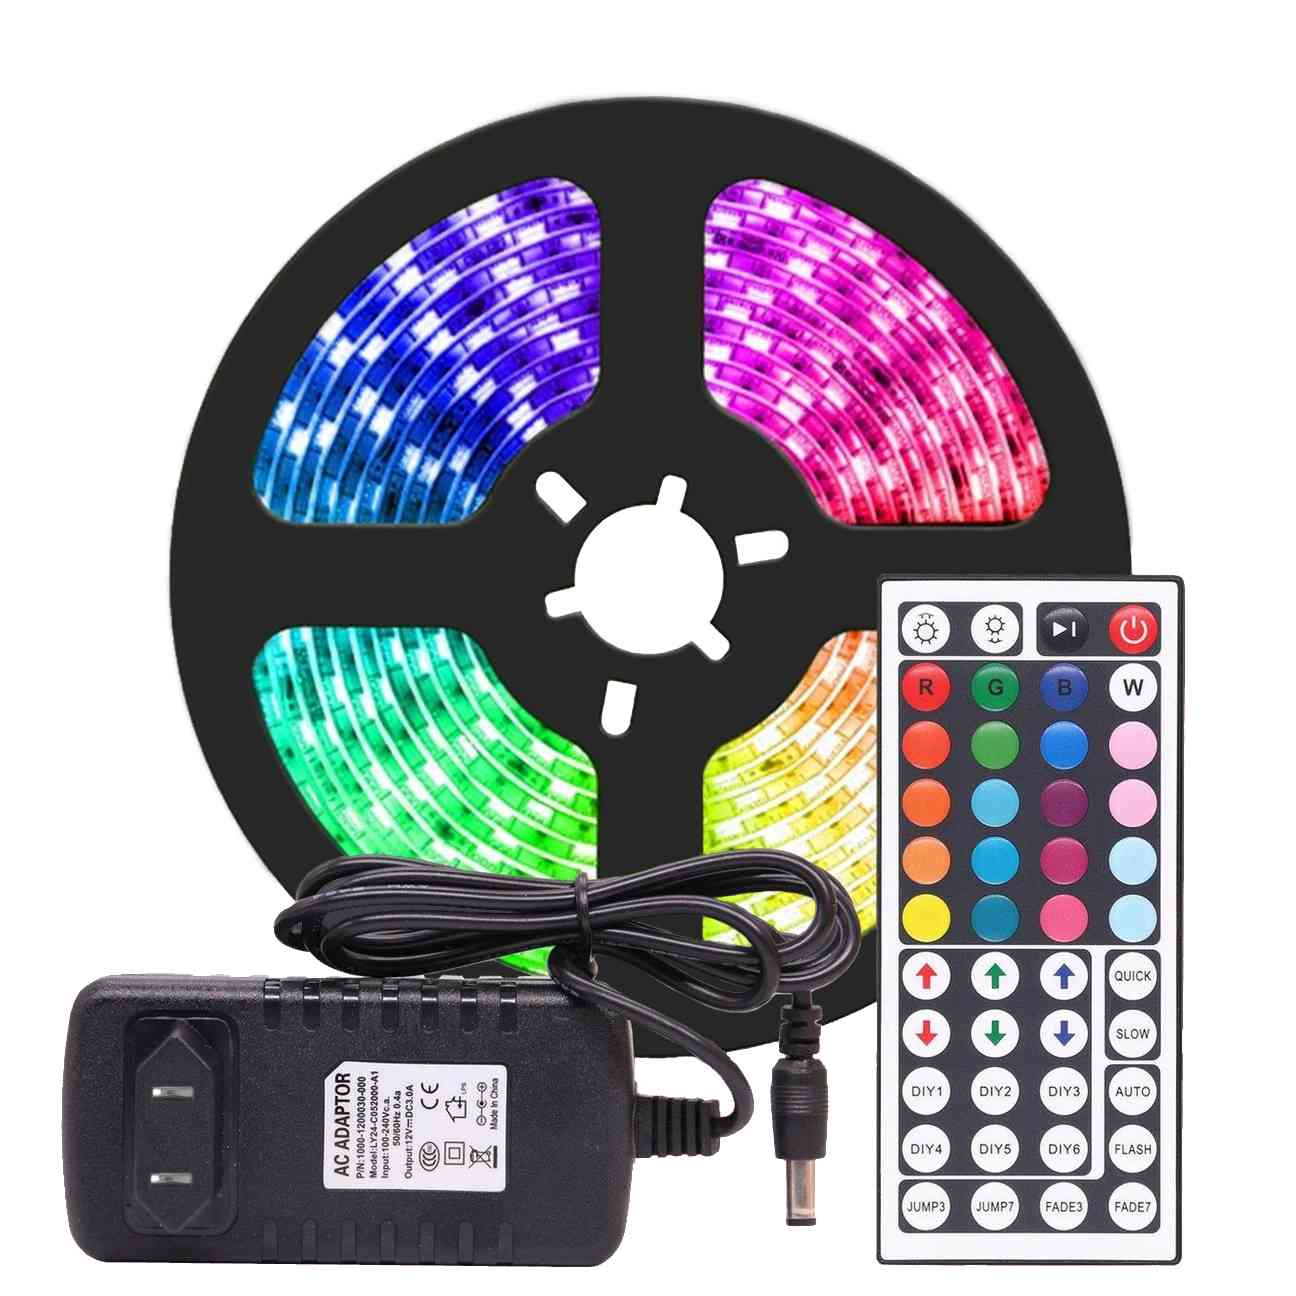 Light up your room with our Eternal LEDs Strip Lights! Turn your room into the room of your dreams with the best LED strip lights. 44 button, tik tok lights, led lights, led lighting.